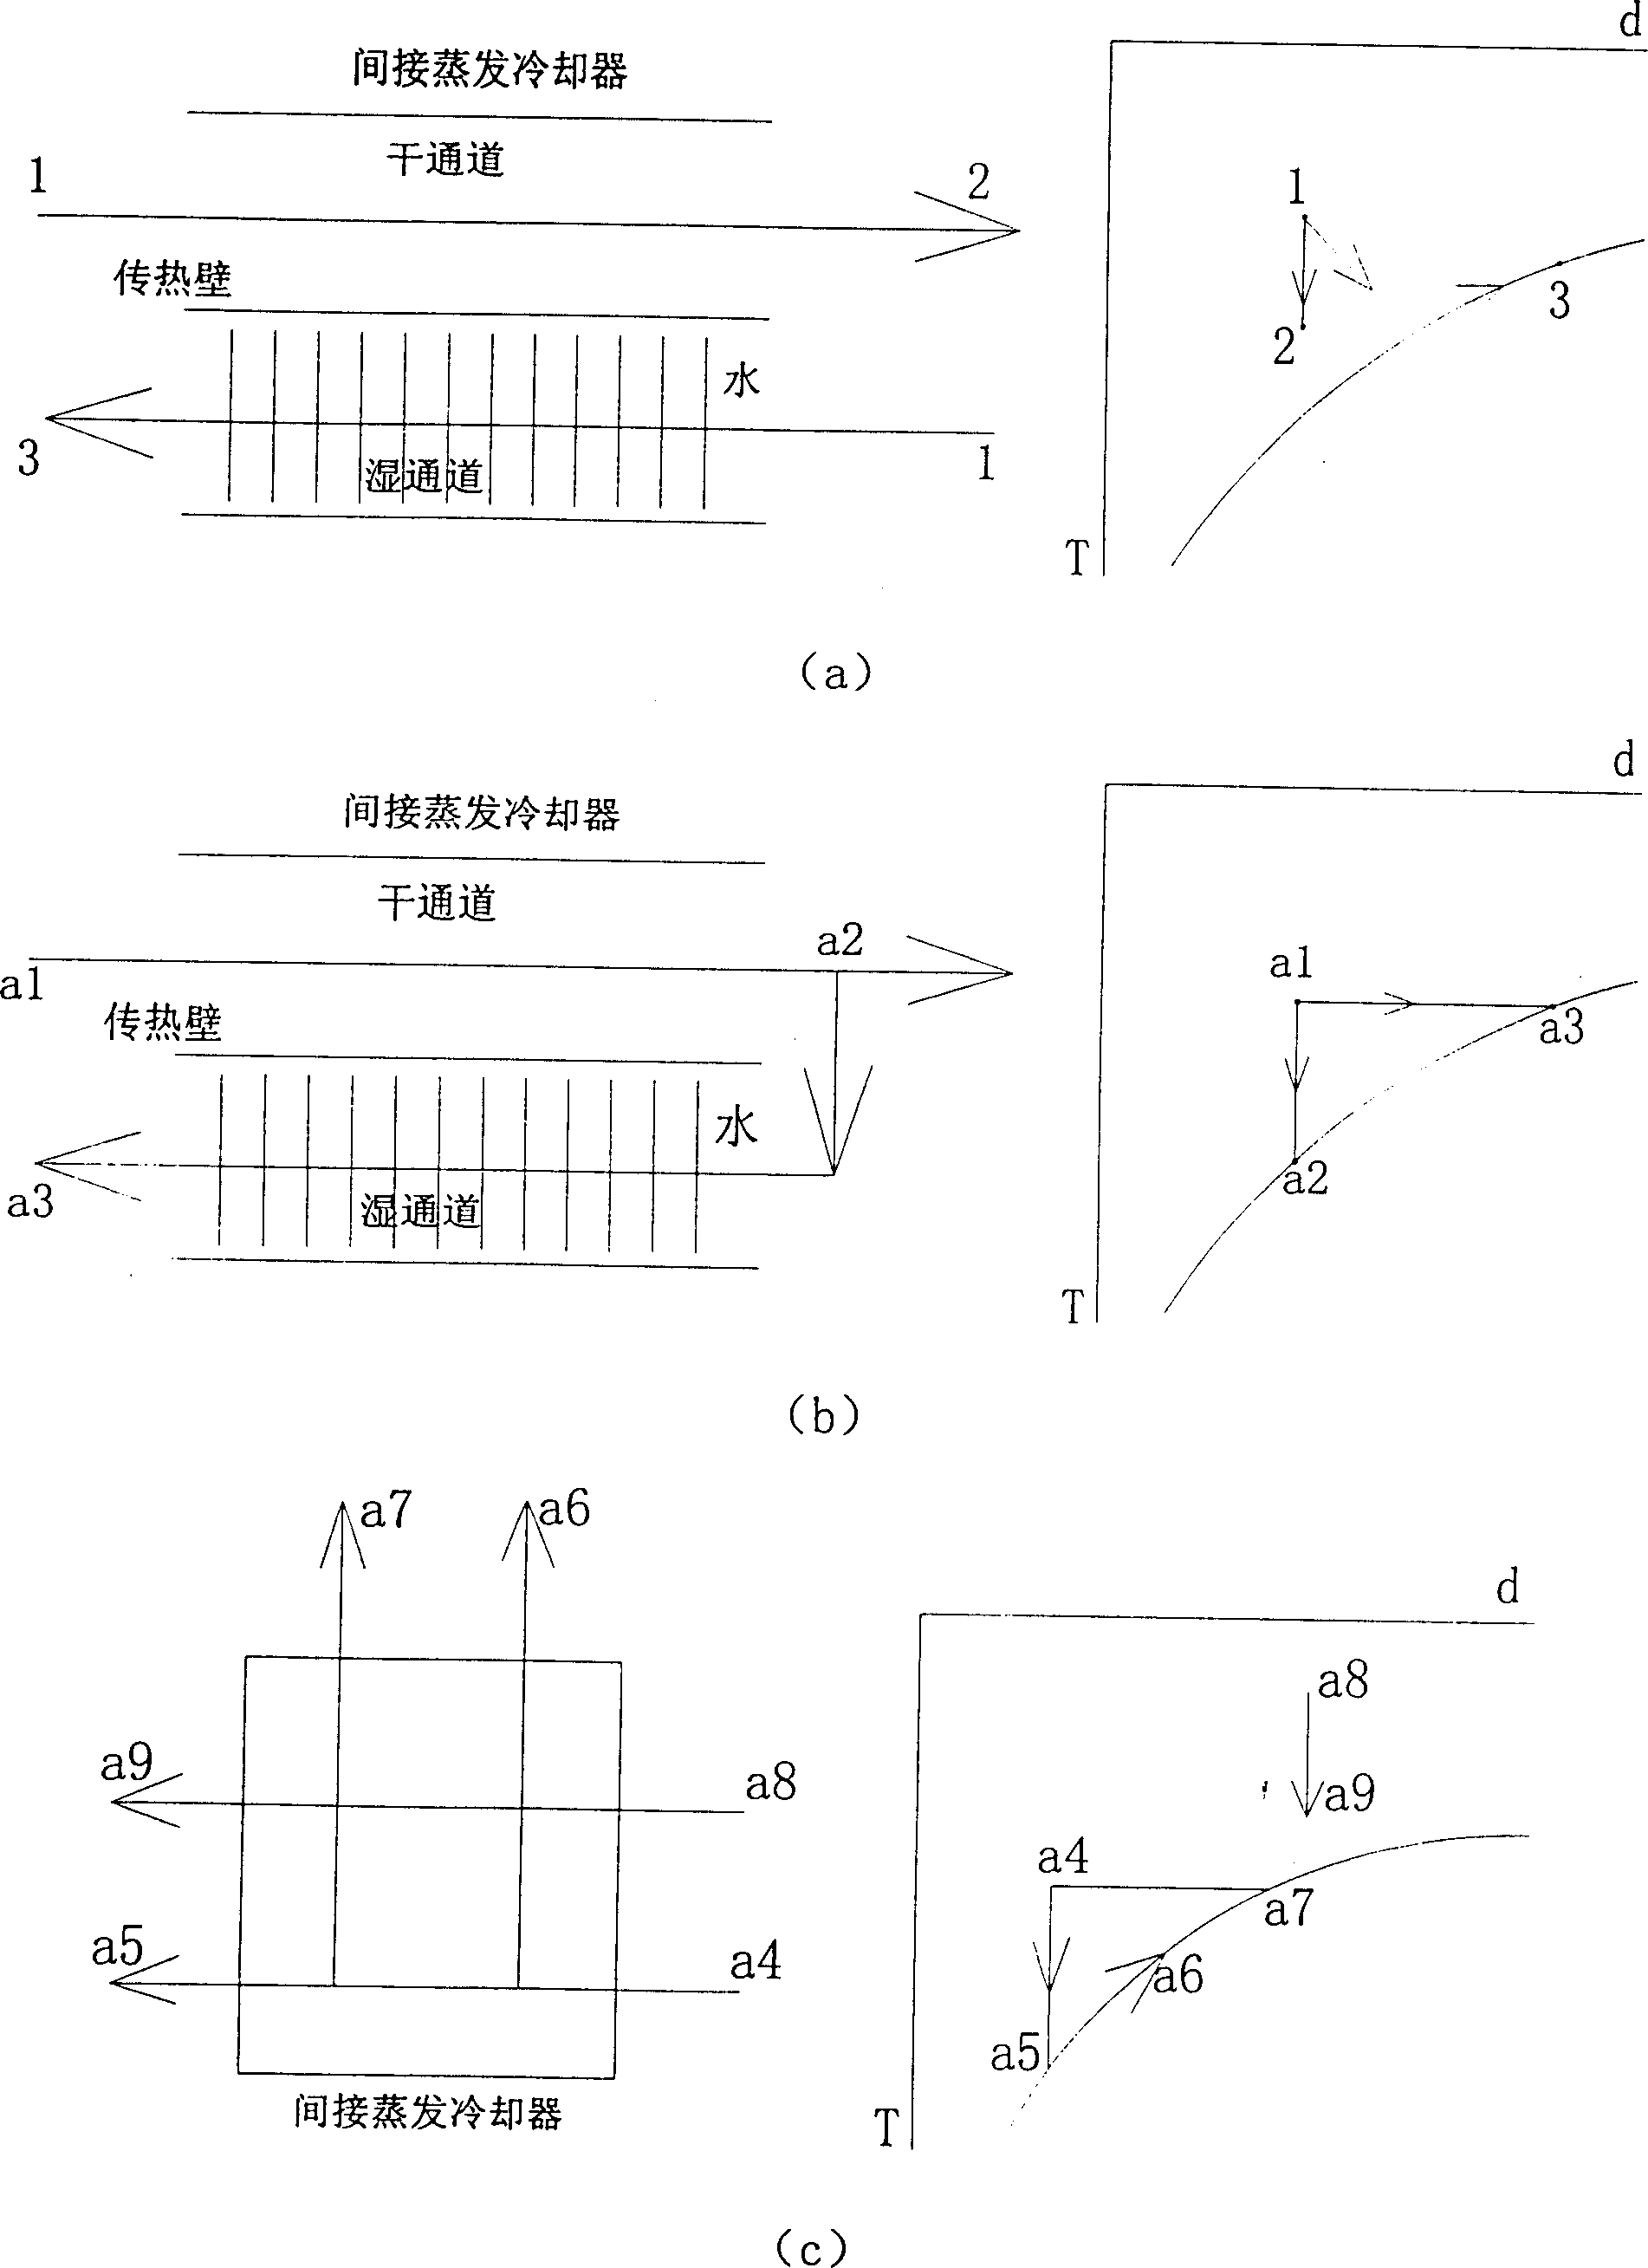 Method for adjusting indoor air environment